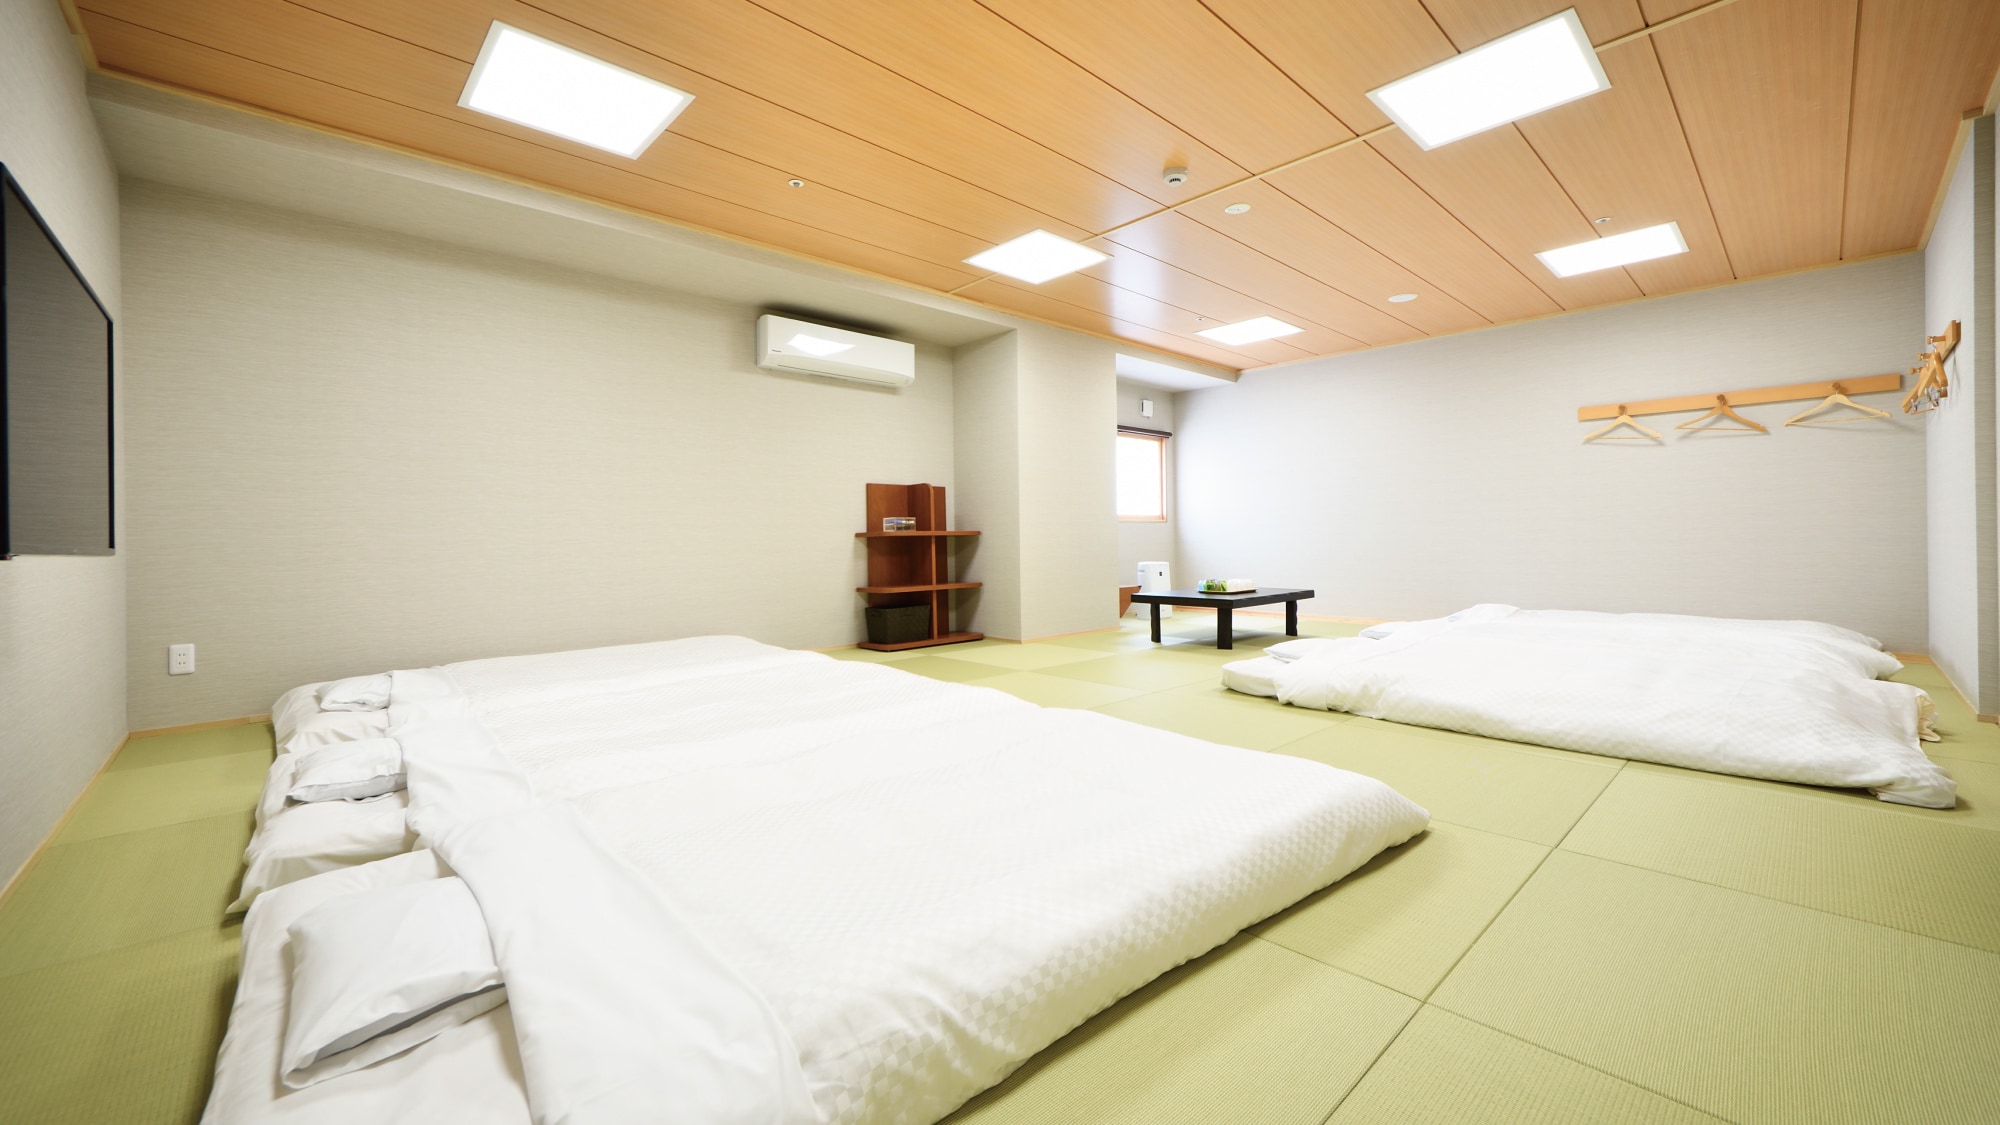 The spacious Japanese-style room has a maximum capacity of 6 people.